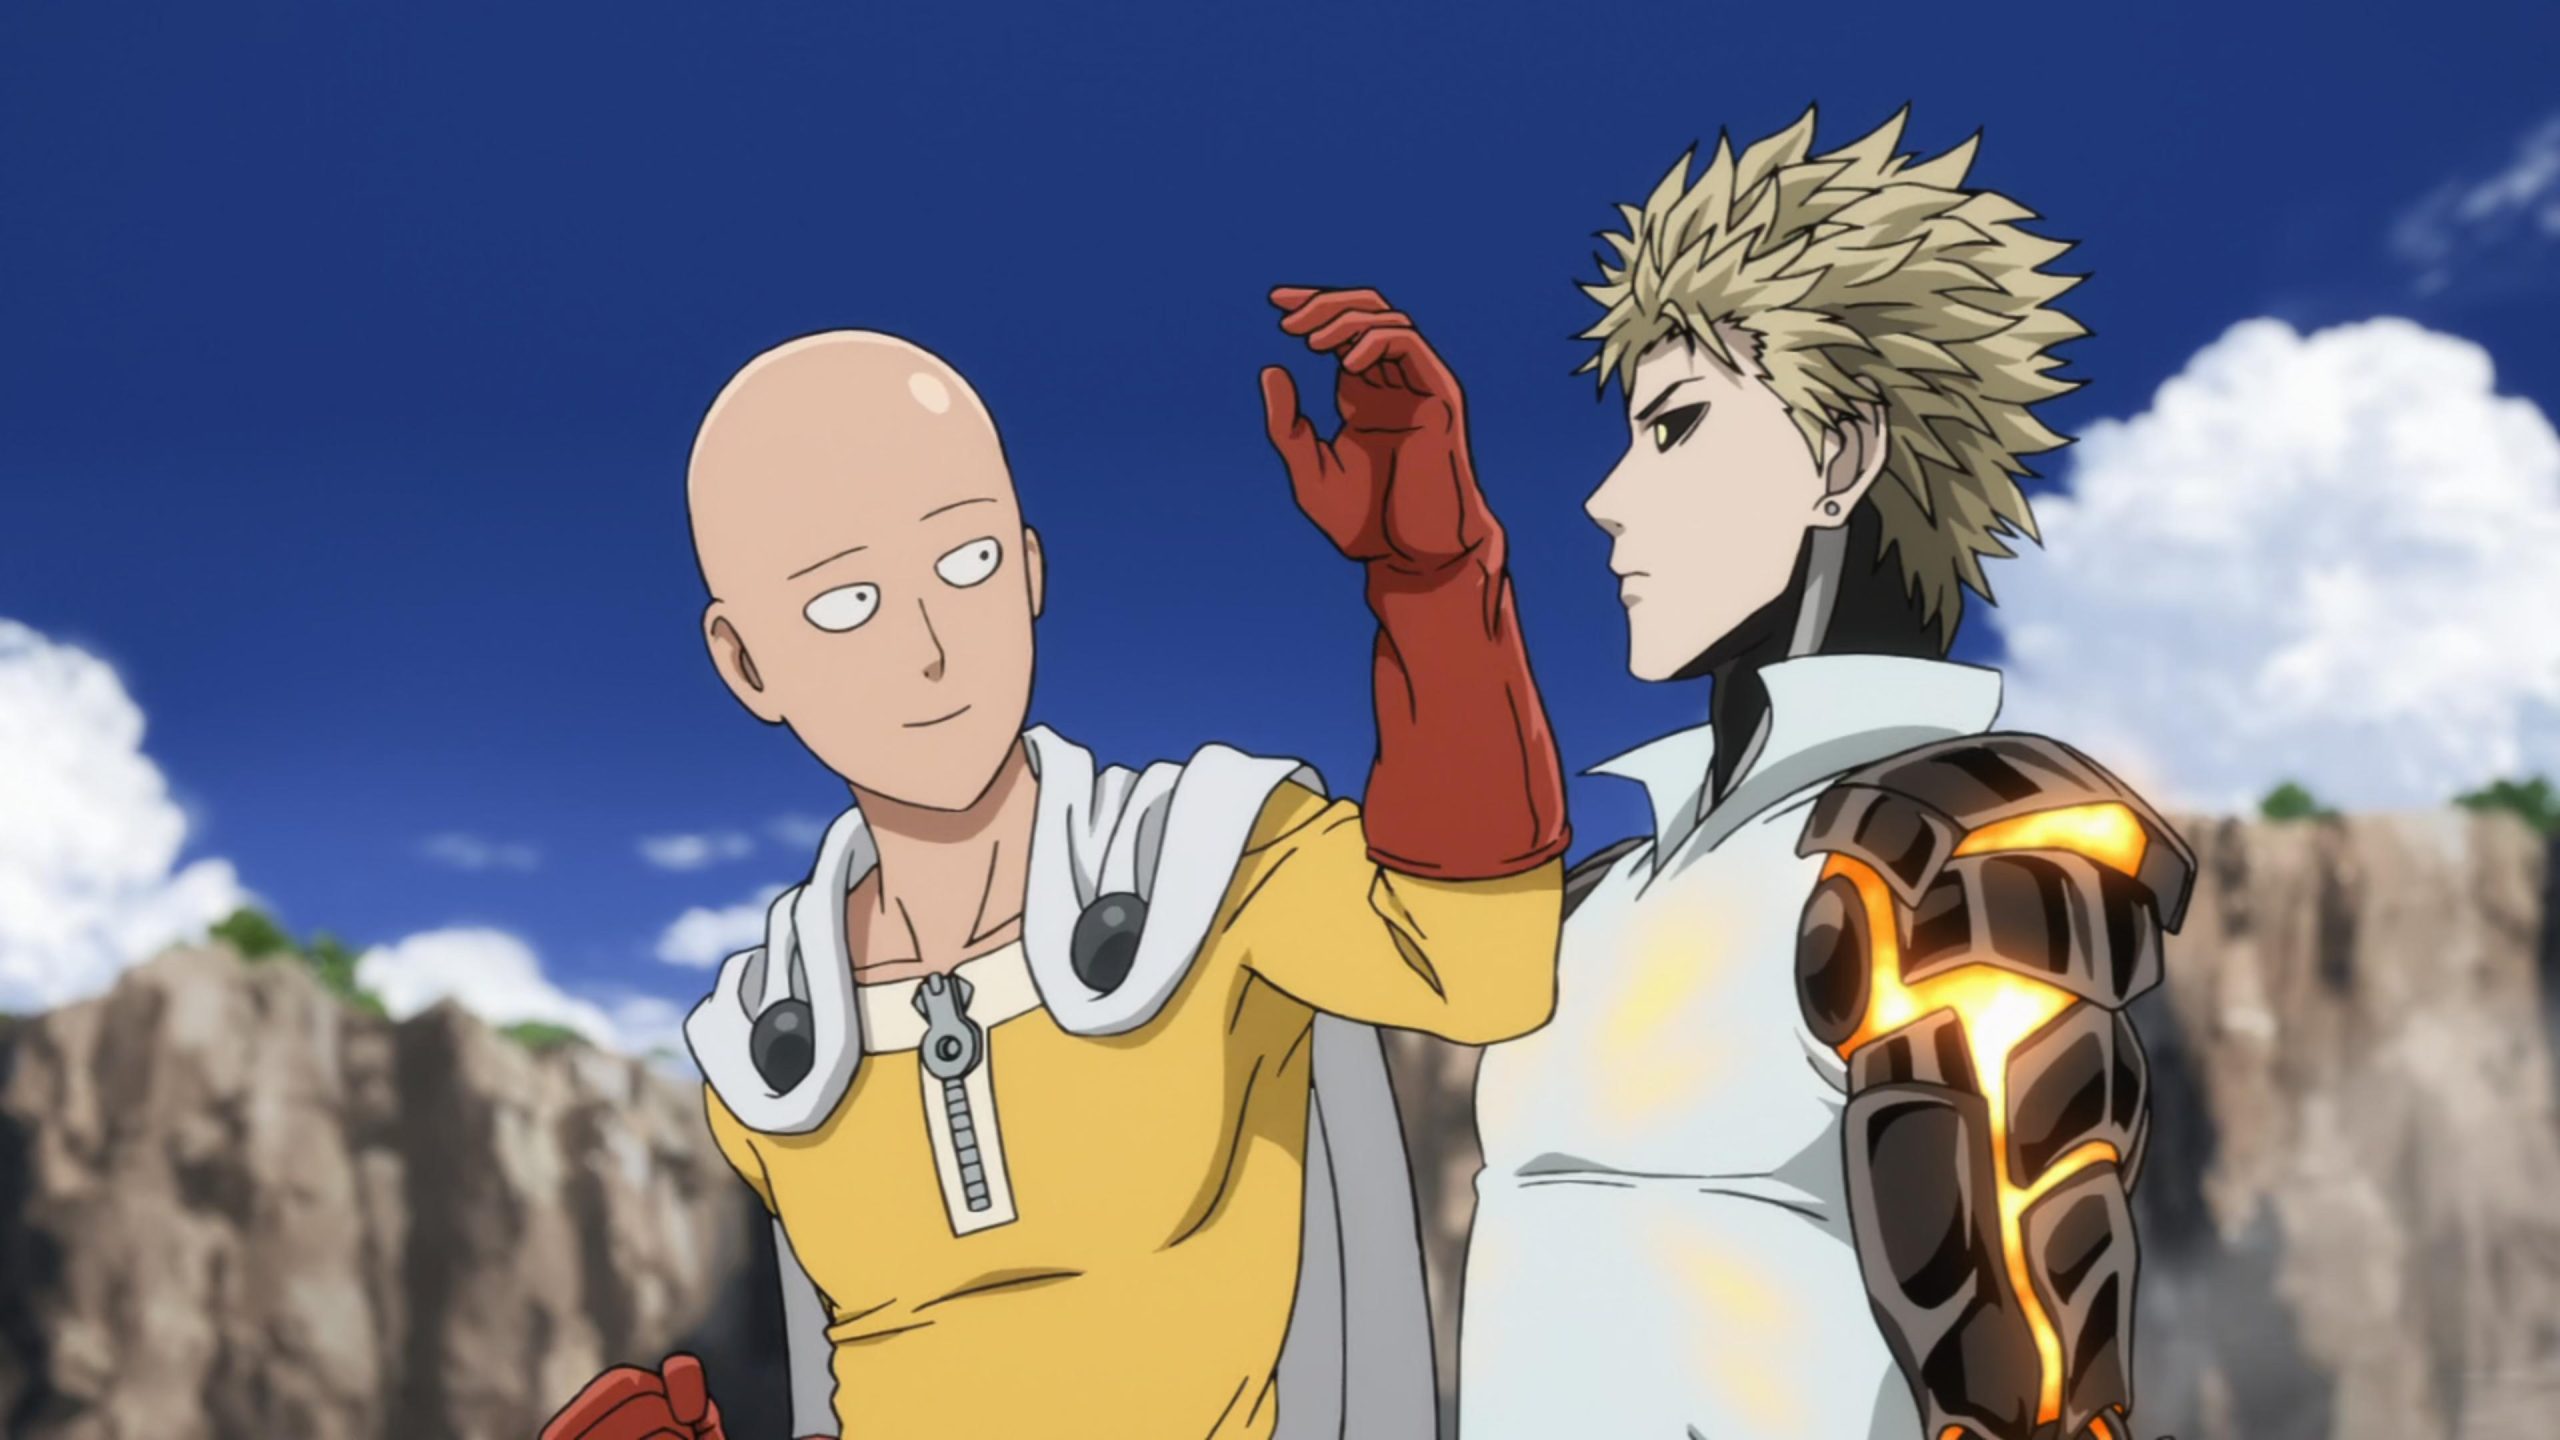 Anime Showdown Shocker Fans Rally as One Punch Man's Saitama Loses to One Piece's Luffy in Fan Vote-